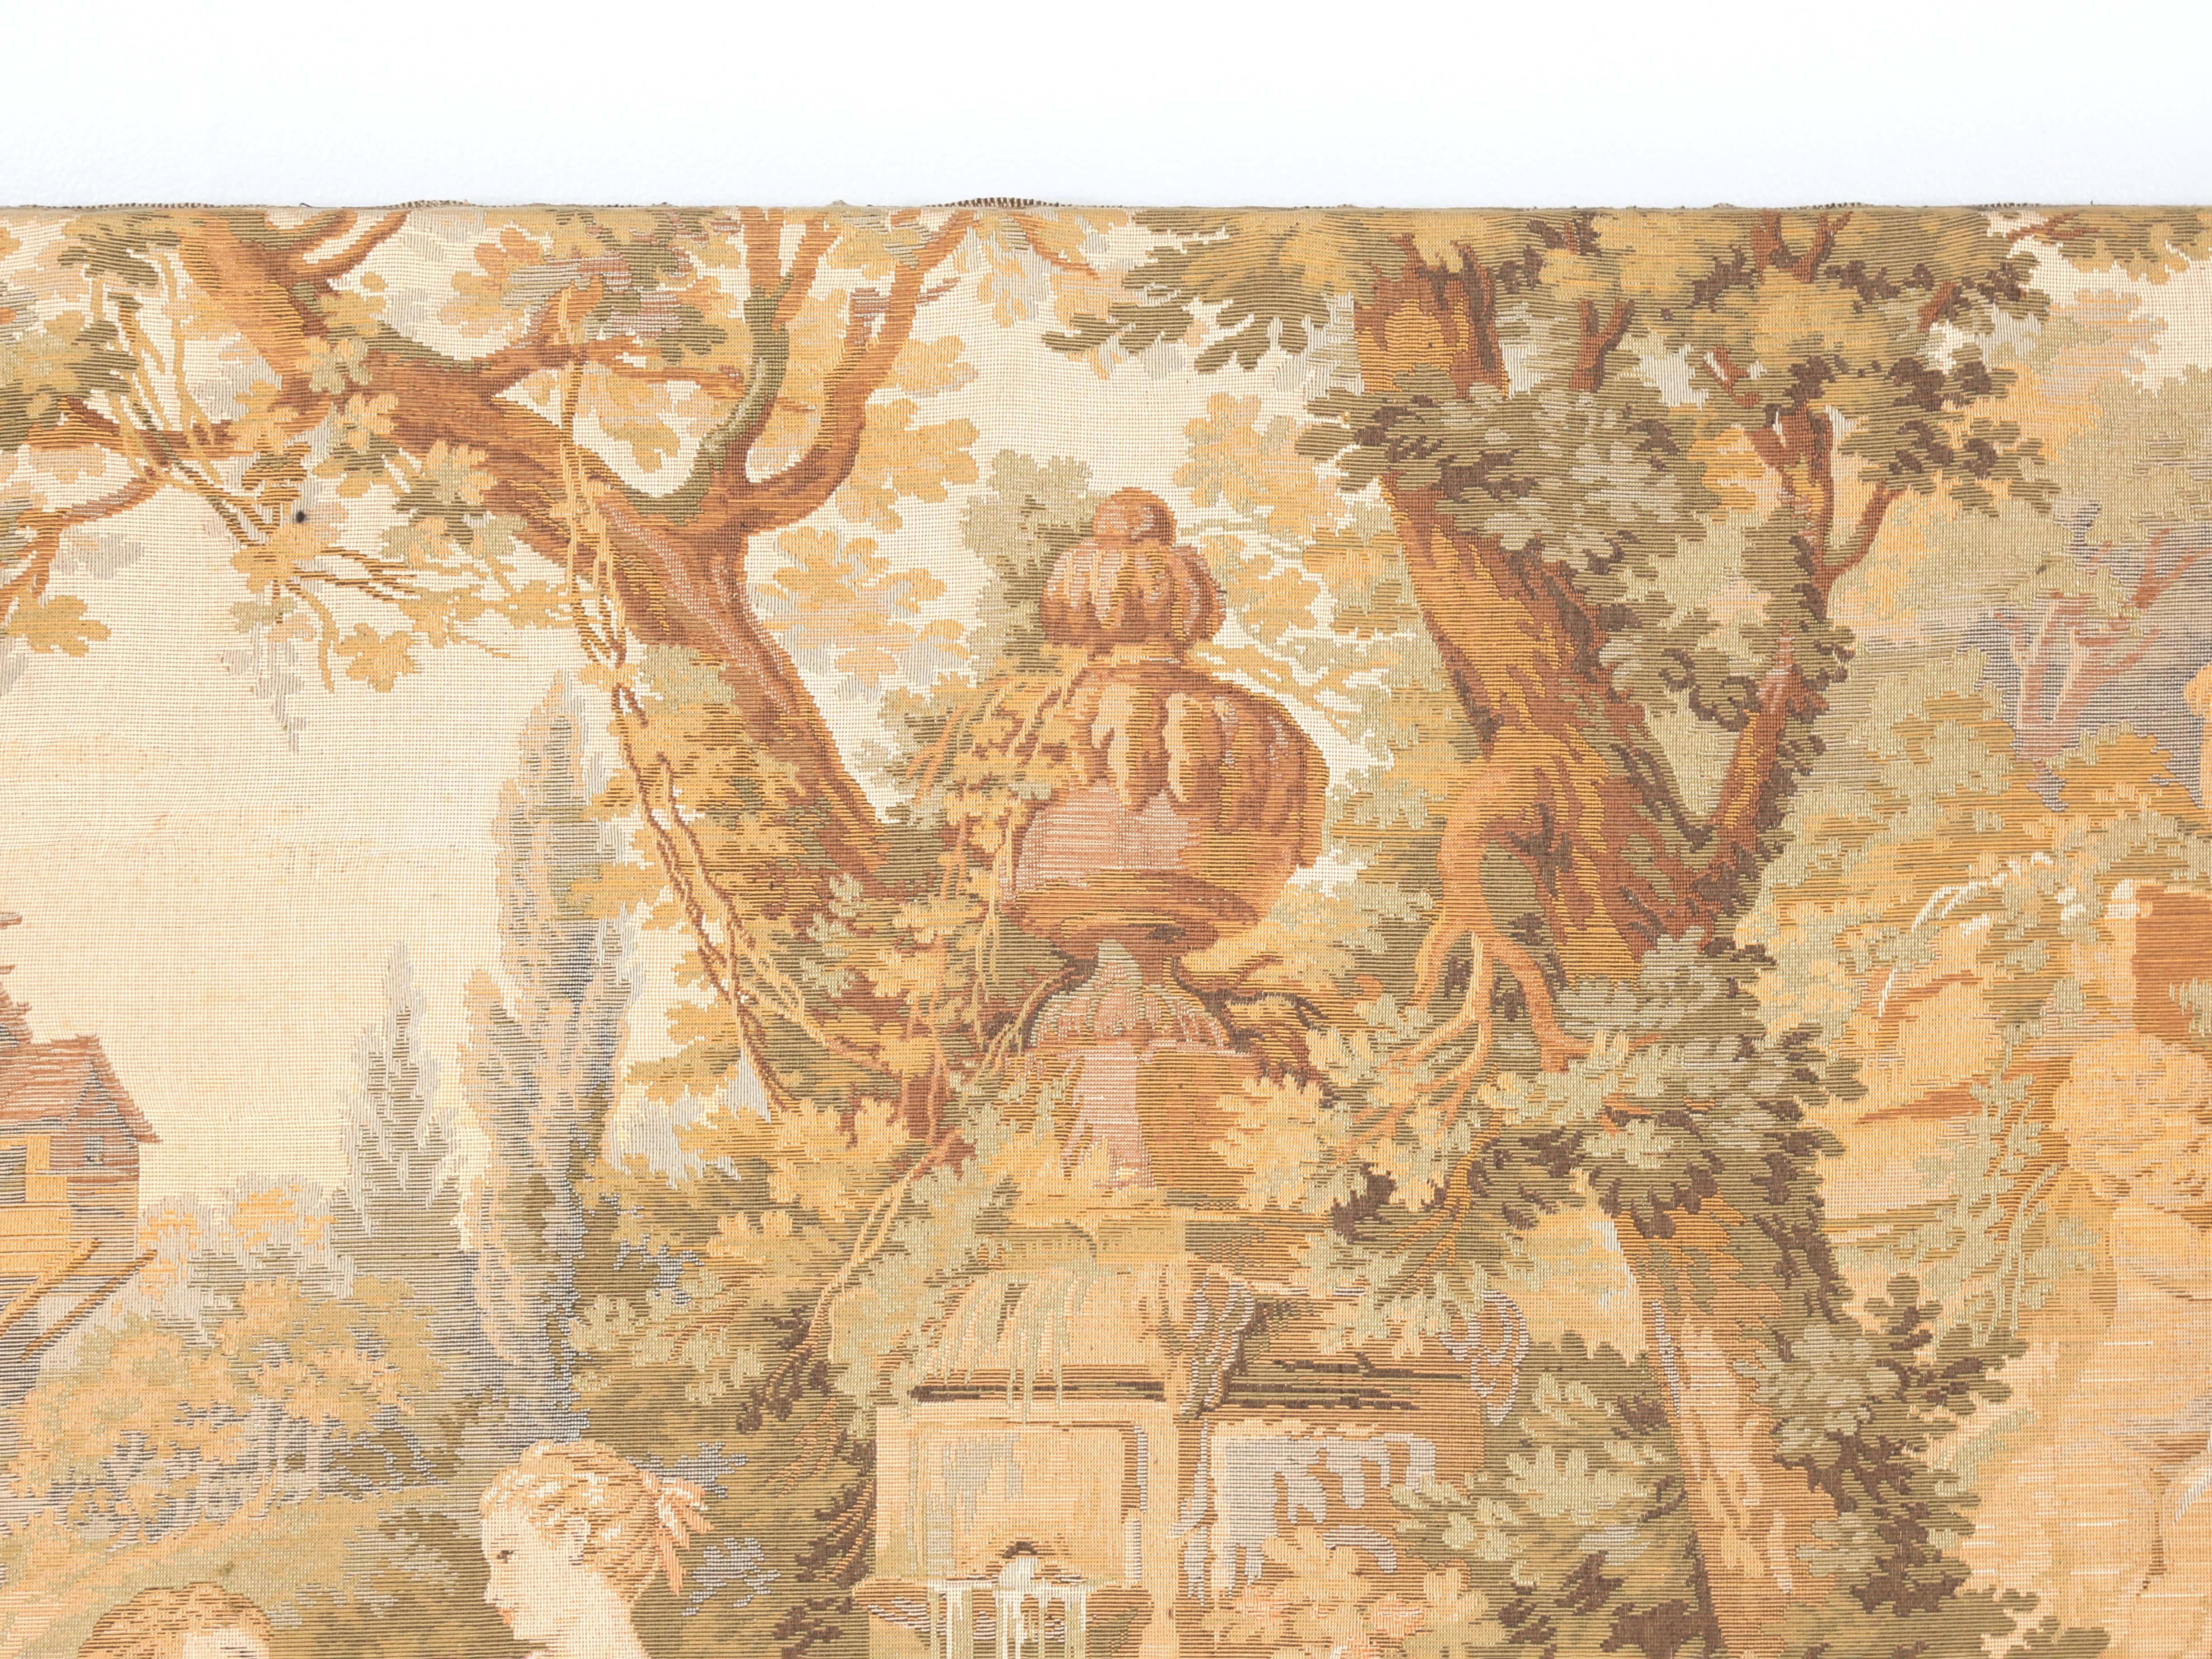 Fabric Antique French Wall Tapestry c1900-1920 For Sale